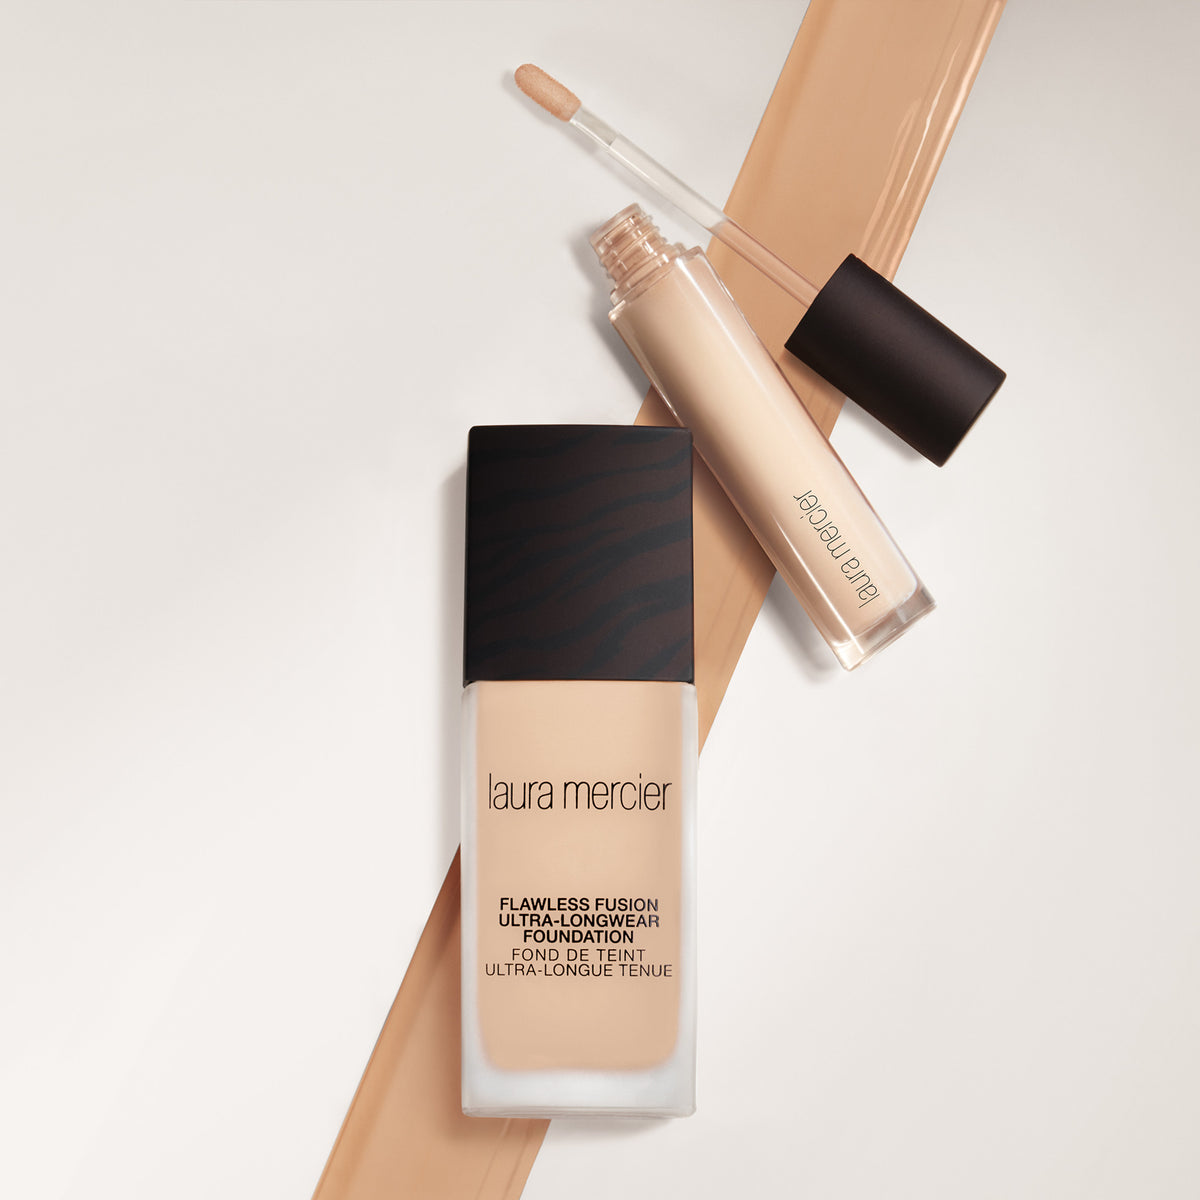 Laura Mercier Flawless Fusion Ultra-Longwear Concealer . This product is for medium complexions